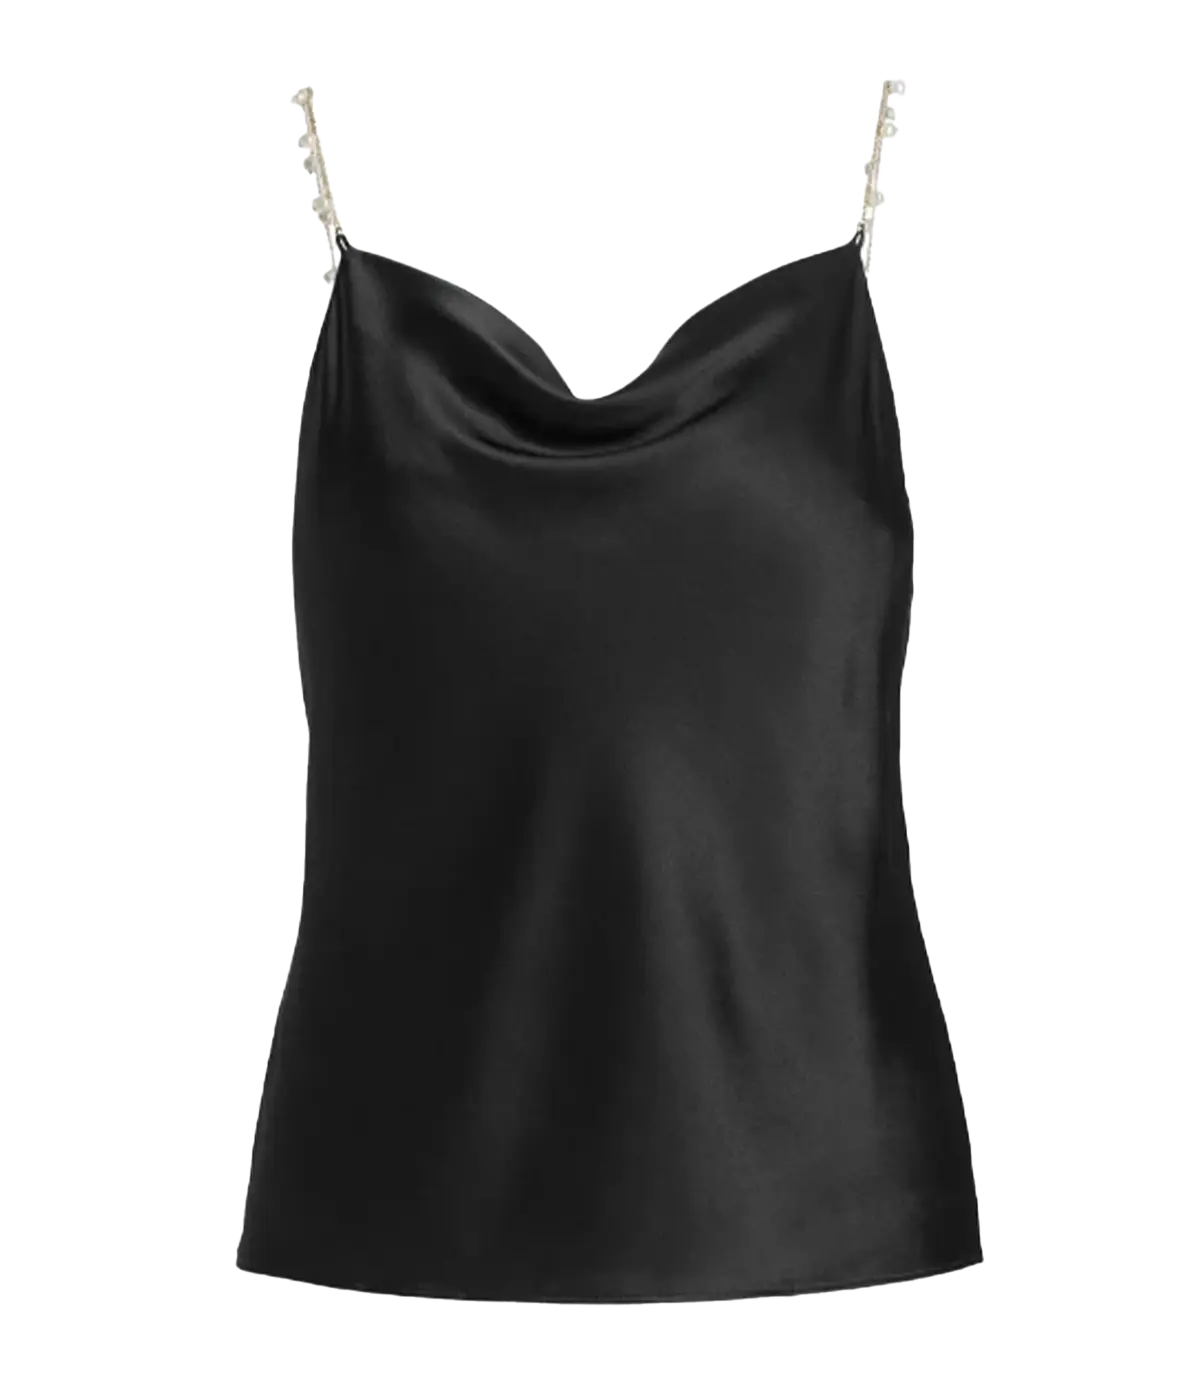 An elevated 100% silk camisole, with pearl chain straps, cowl neck and bias cut design all in a black colourway. Day to Night, Date night top, made internationally, bra friendly, lunch with girlfriends. 